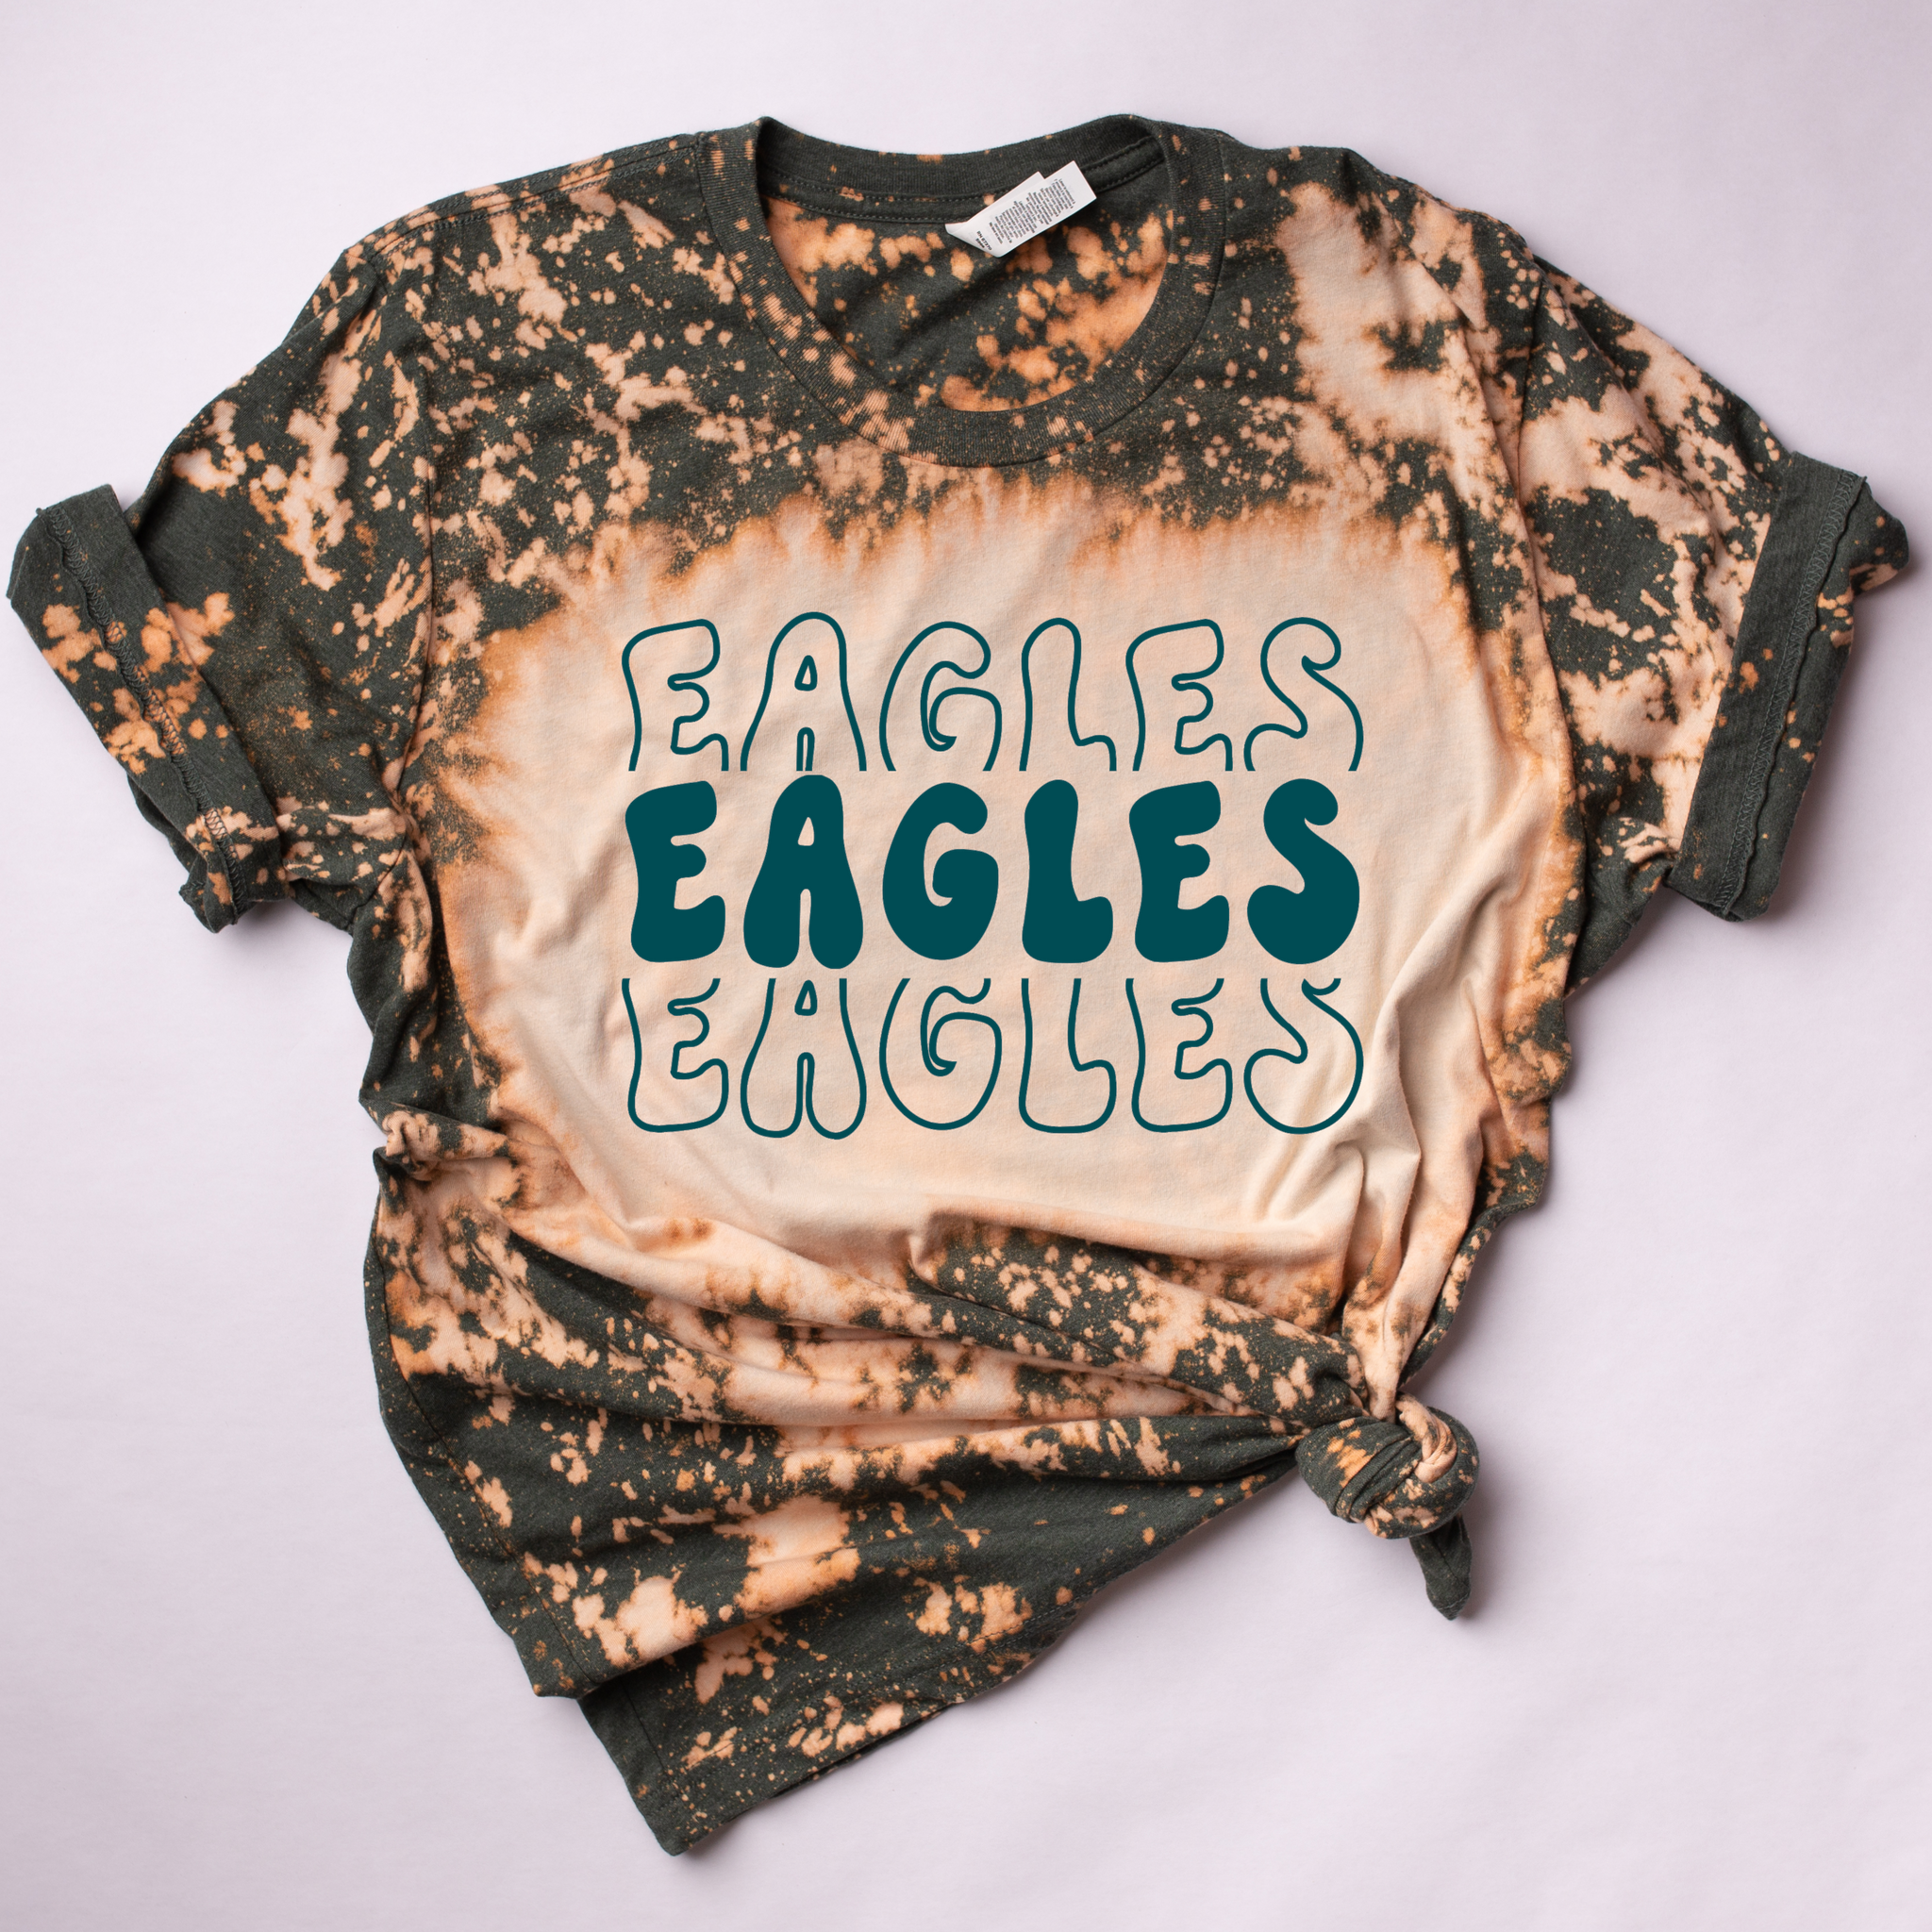 Midnight Green Bleached Eagles Tee